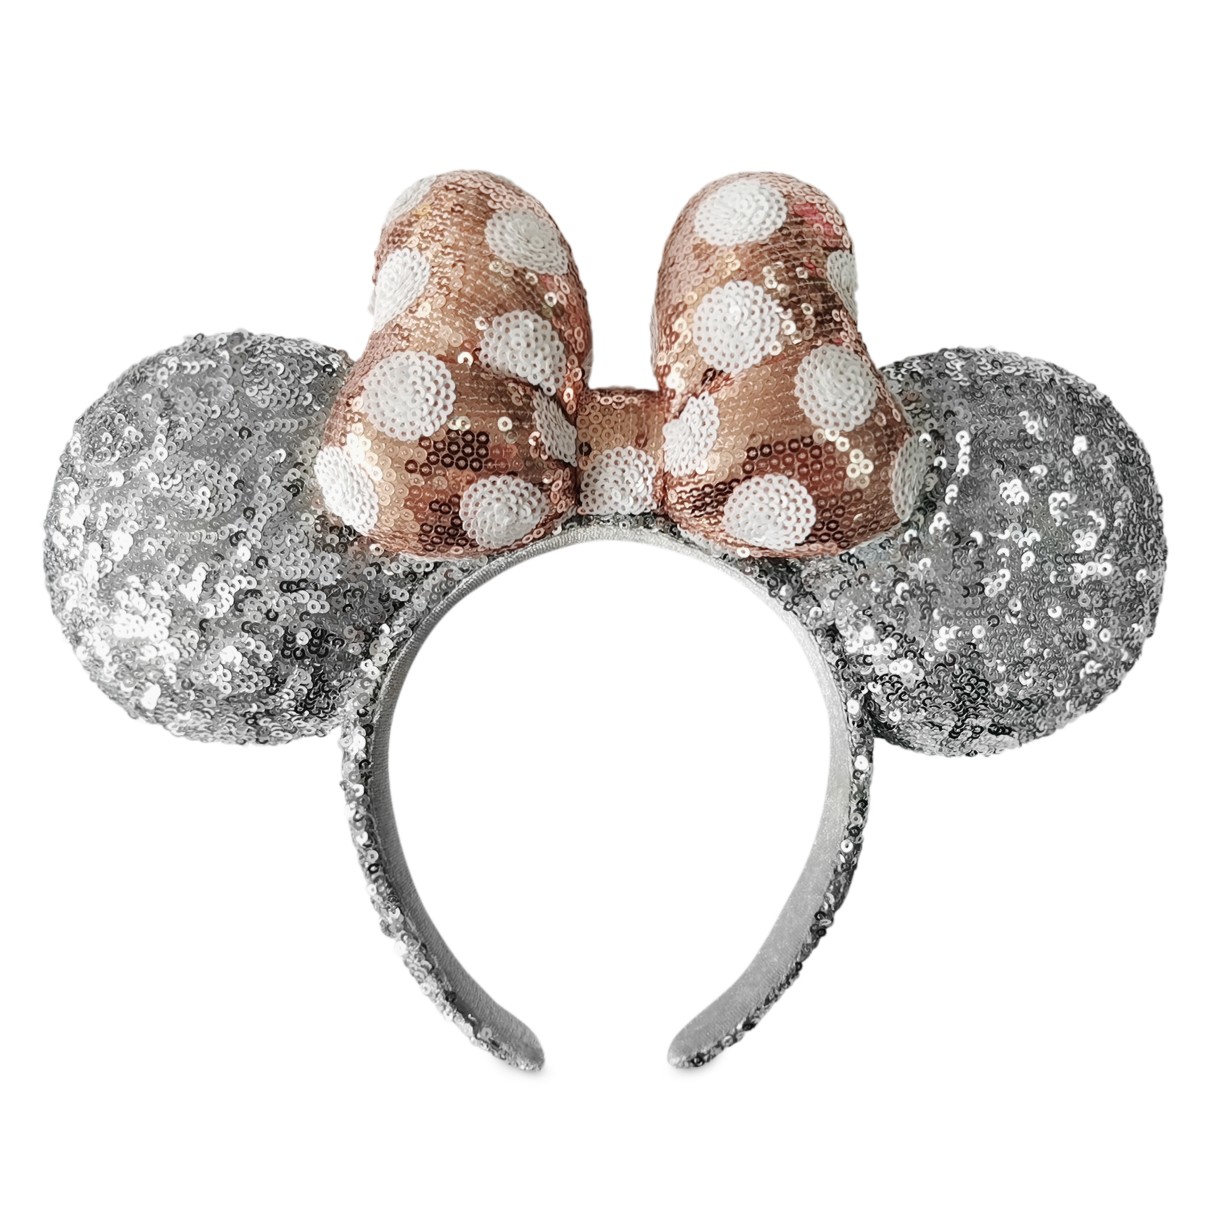 Minnie Mouse Silver Sequined Ear Headband with Rose Gold Bow